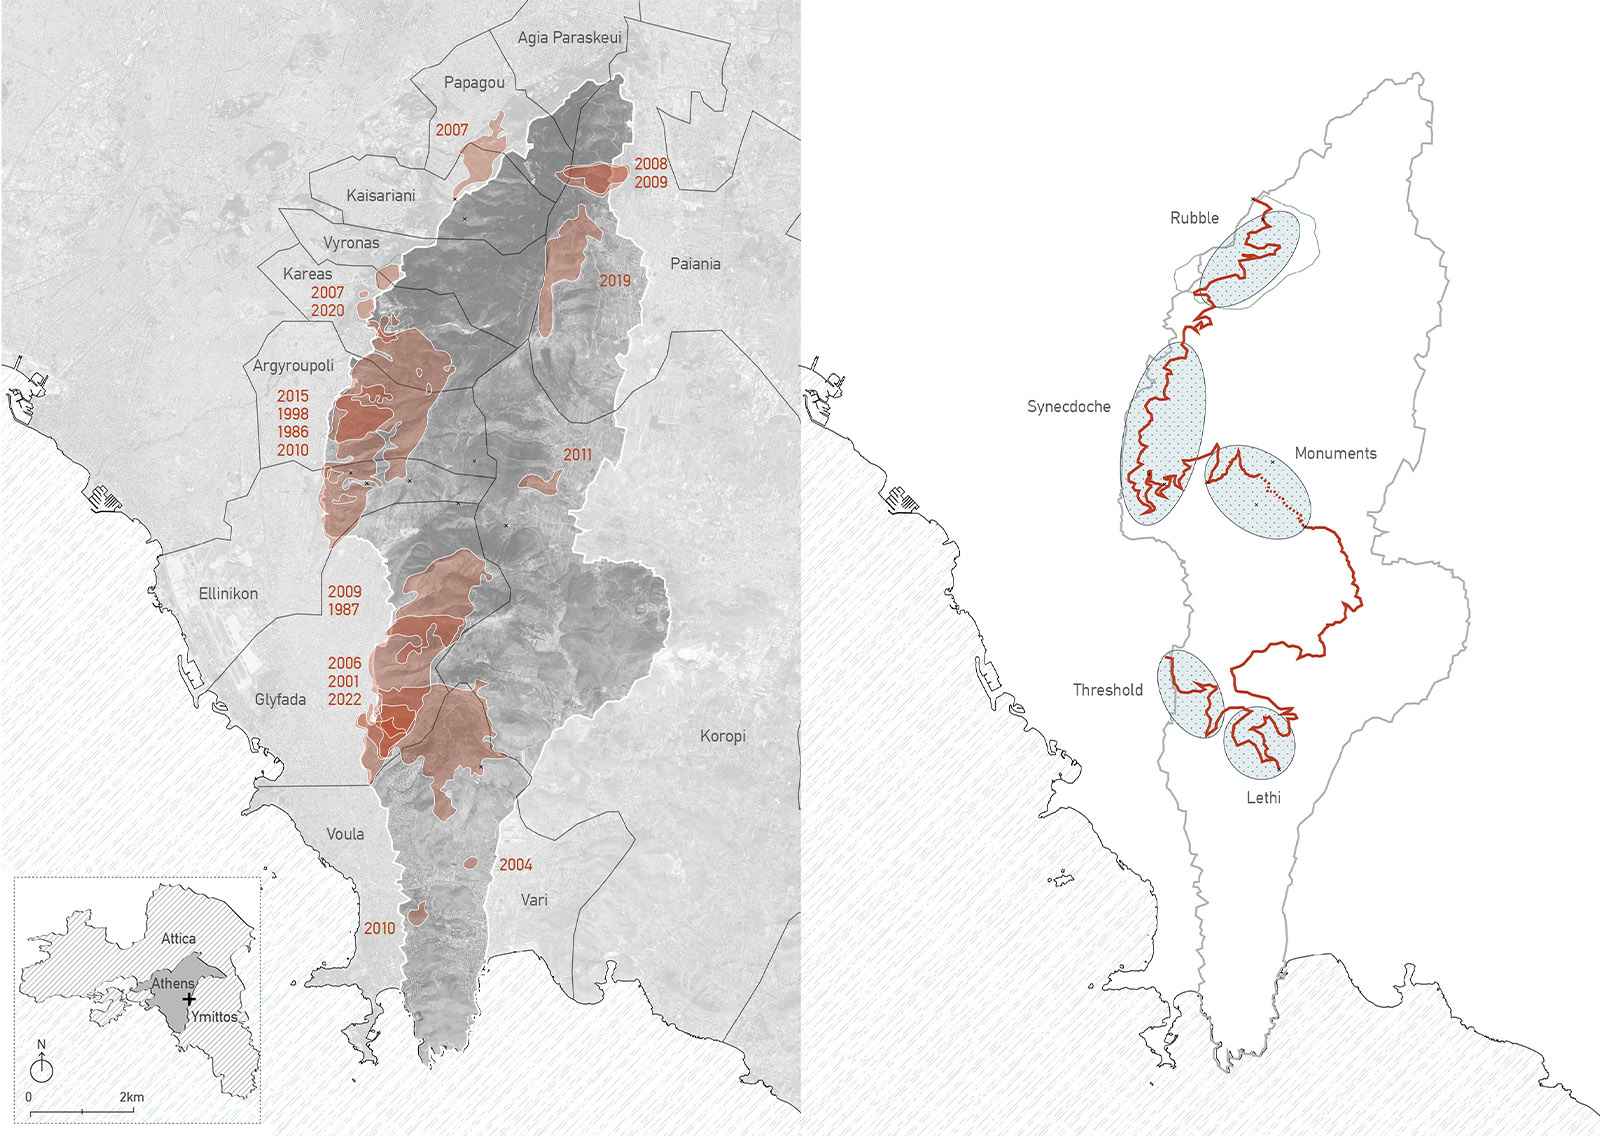 Archisearch Flourishing through the Ashes: Mount Ymitos as a Landscape Ruin by Alexandra Souvatzi | Winner of the Student Dissertation Award of the Landscape Institute 2022